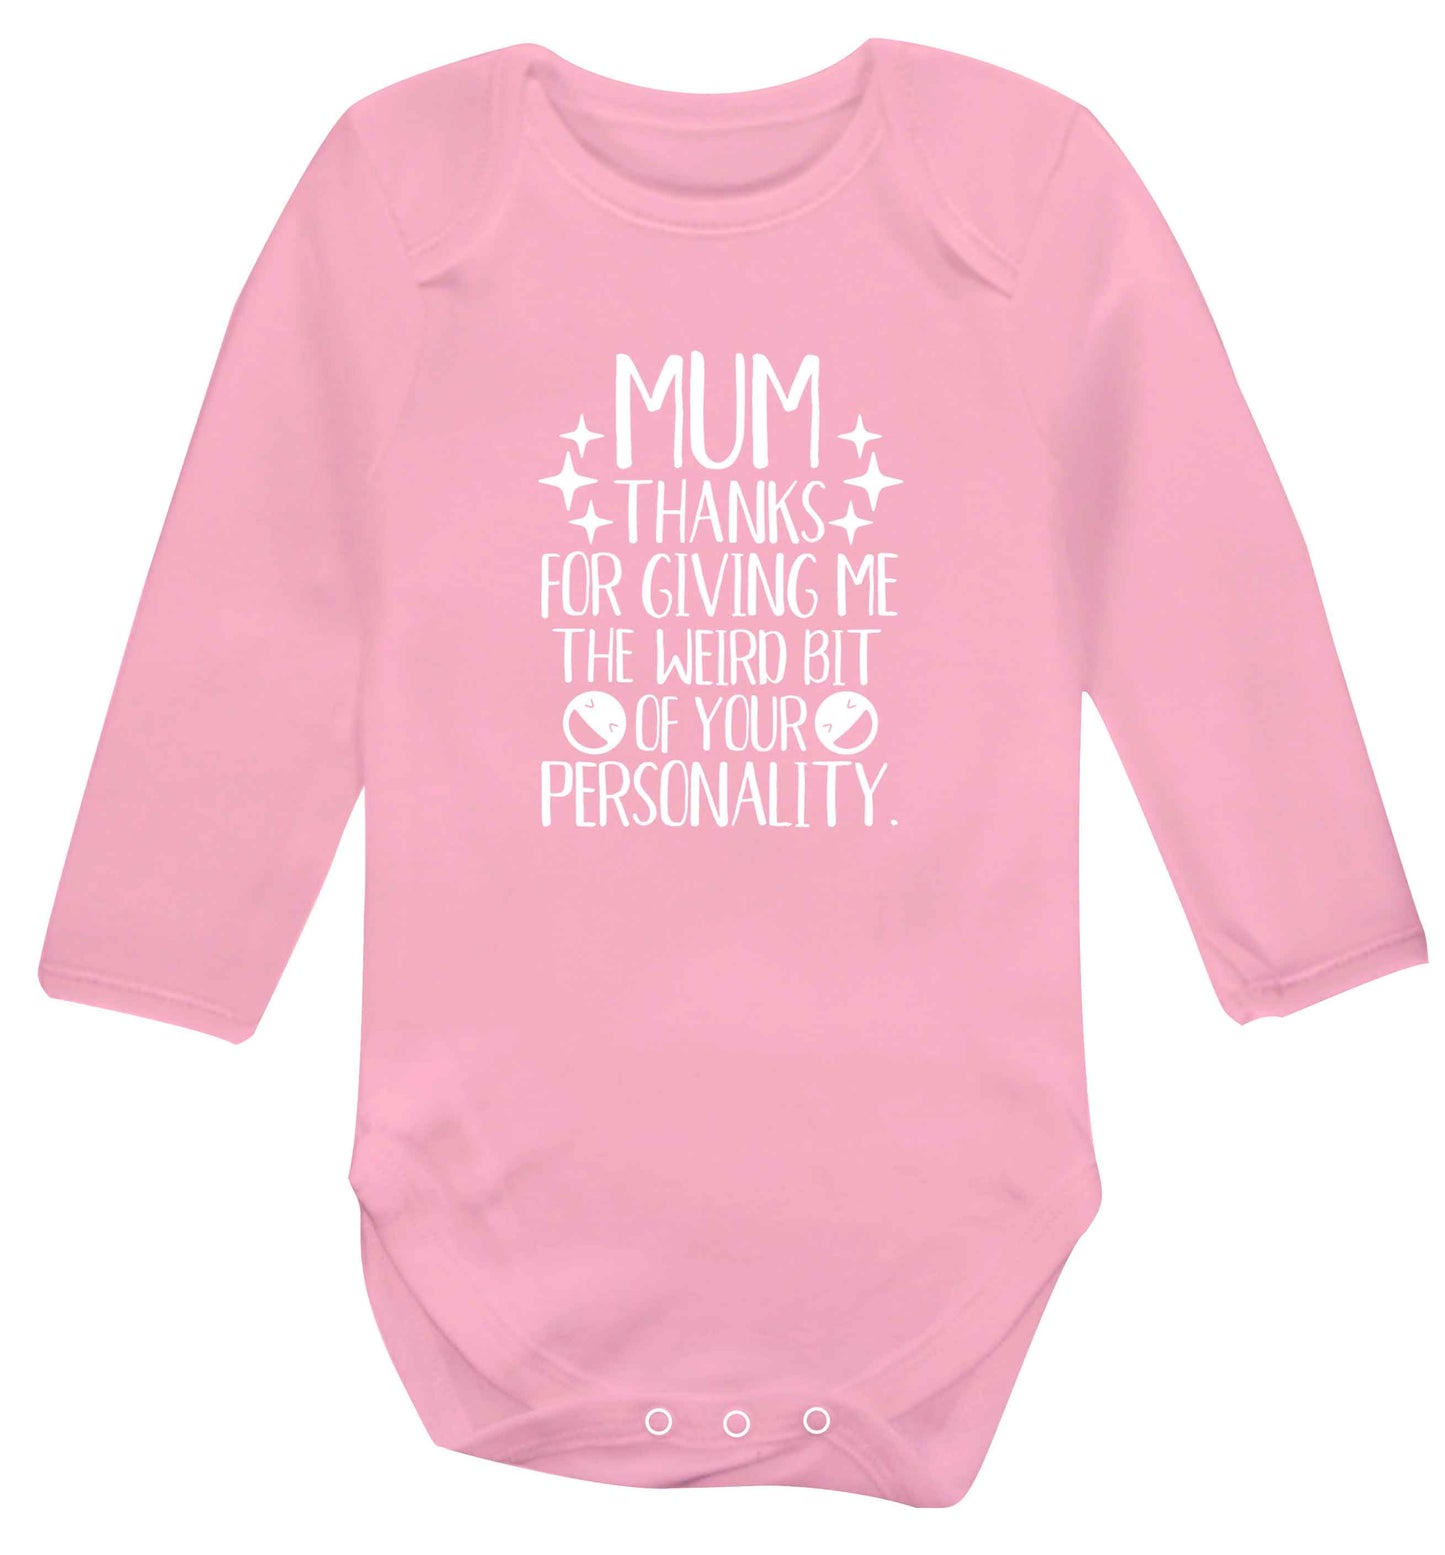 Mum, I love you more than halloumi and if you know me at all you know how deep that is baby vest long sleeved pale pink 6-12 months